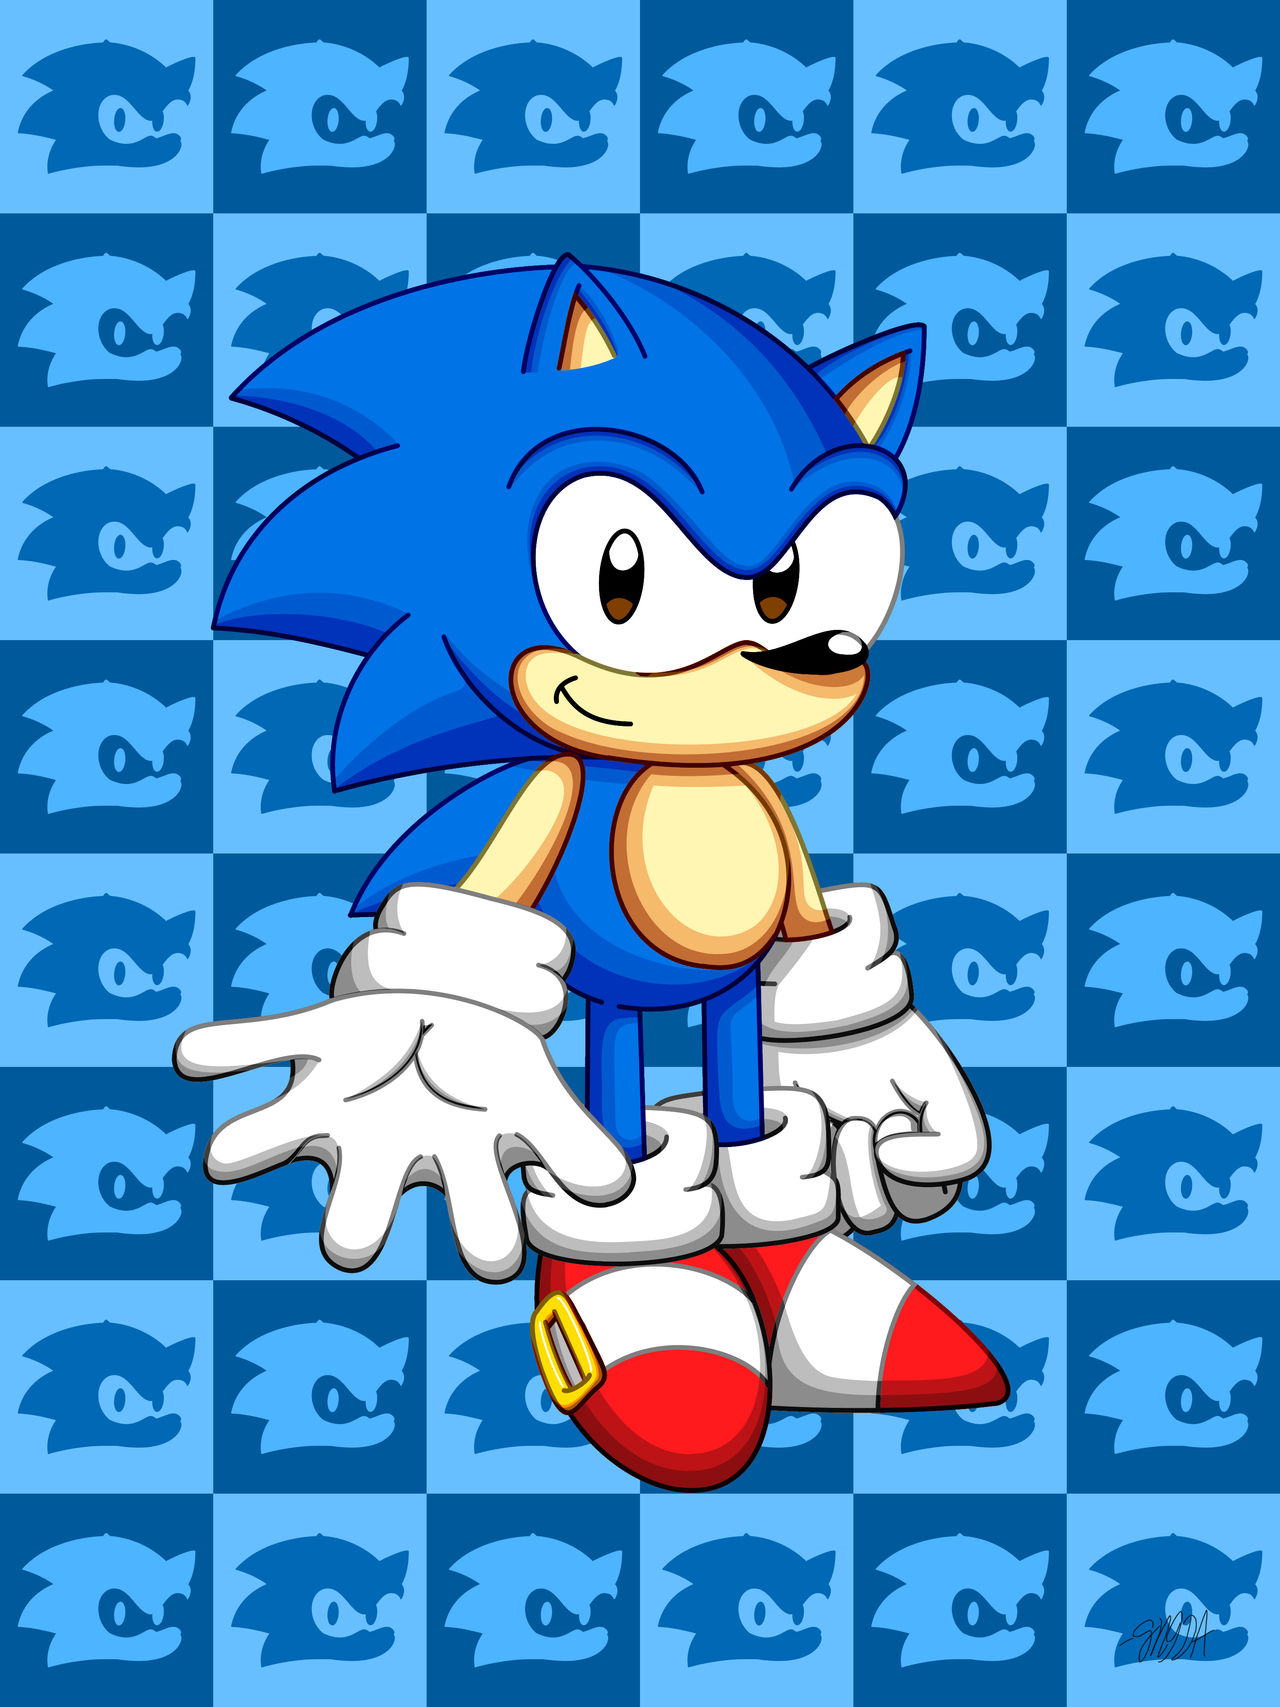 Classic Sonic Render by Peppermint08 on DeviantArt